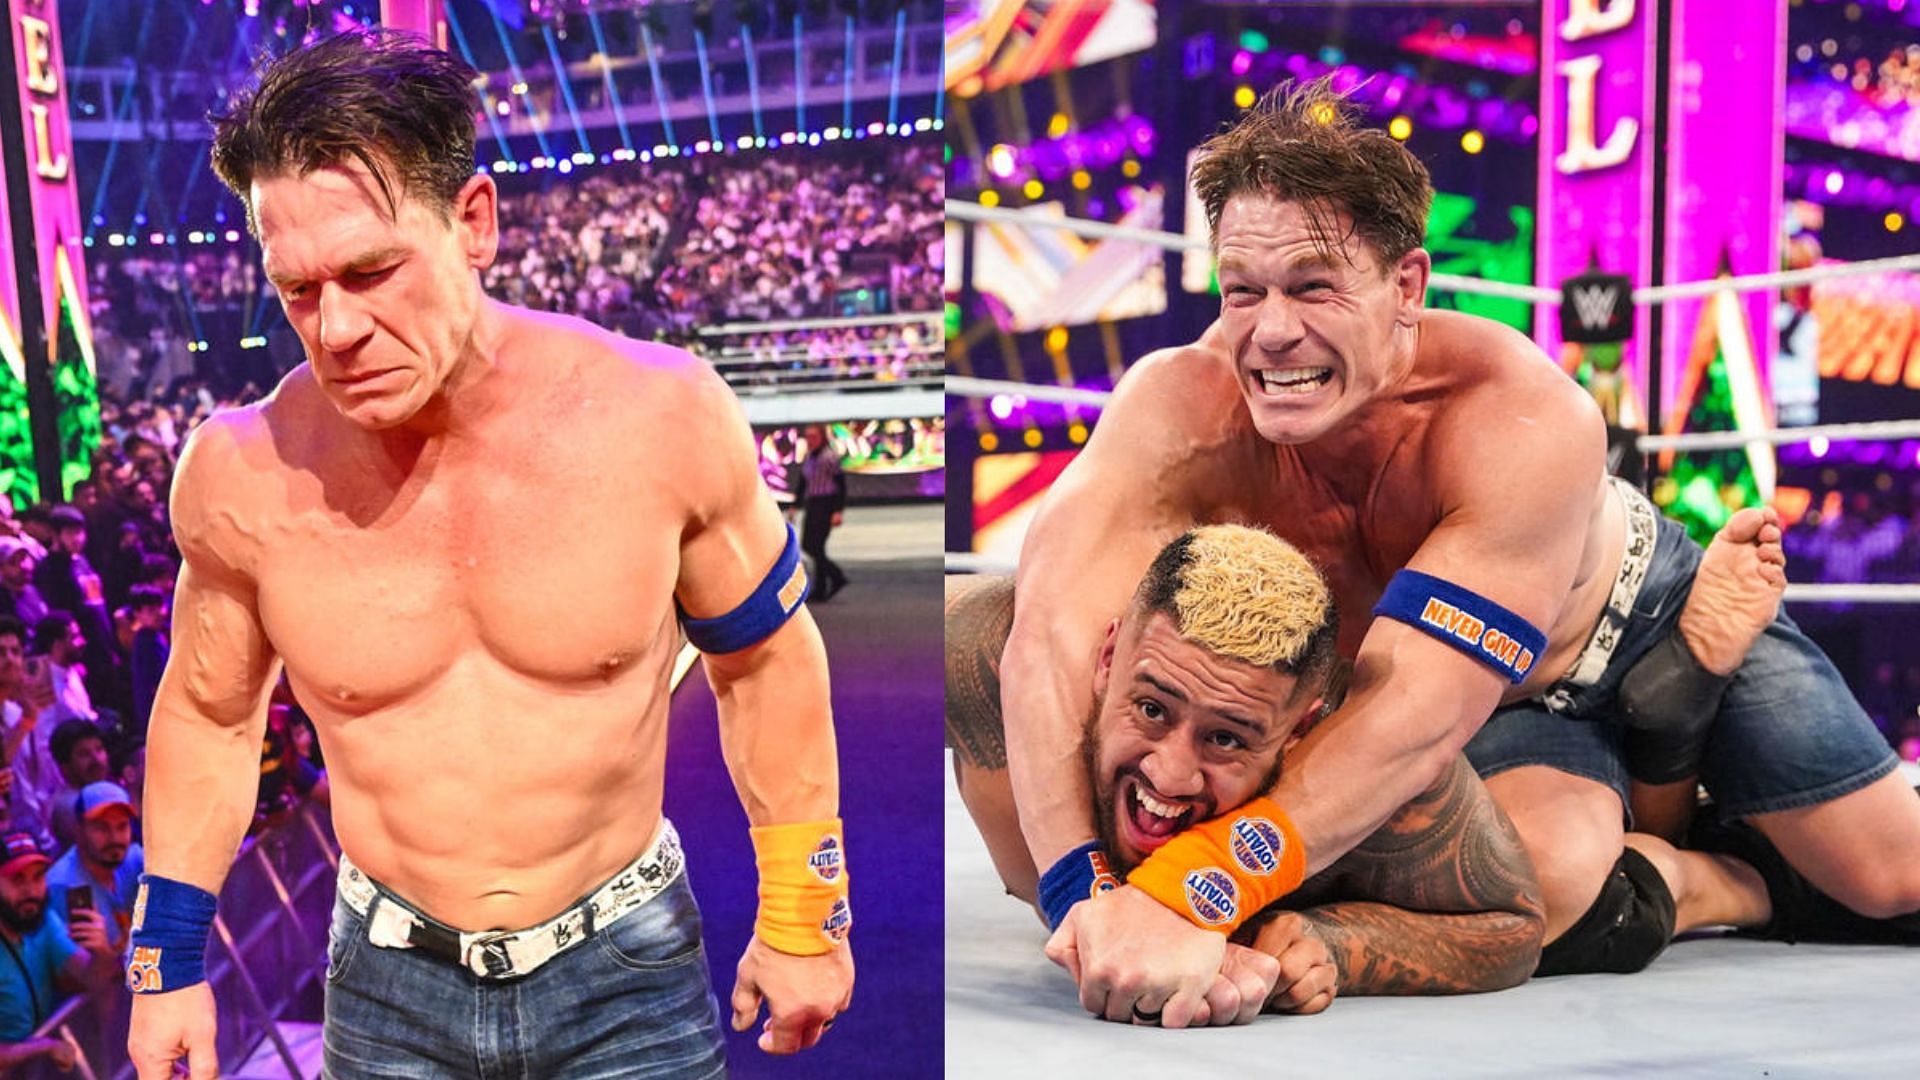 John Cena lost his match against Solo Sikoa at Crown Jewel